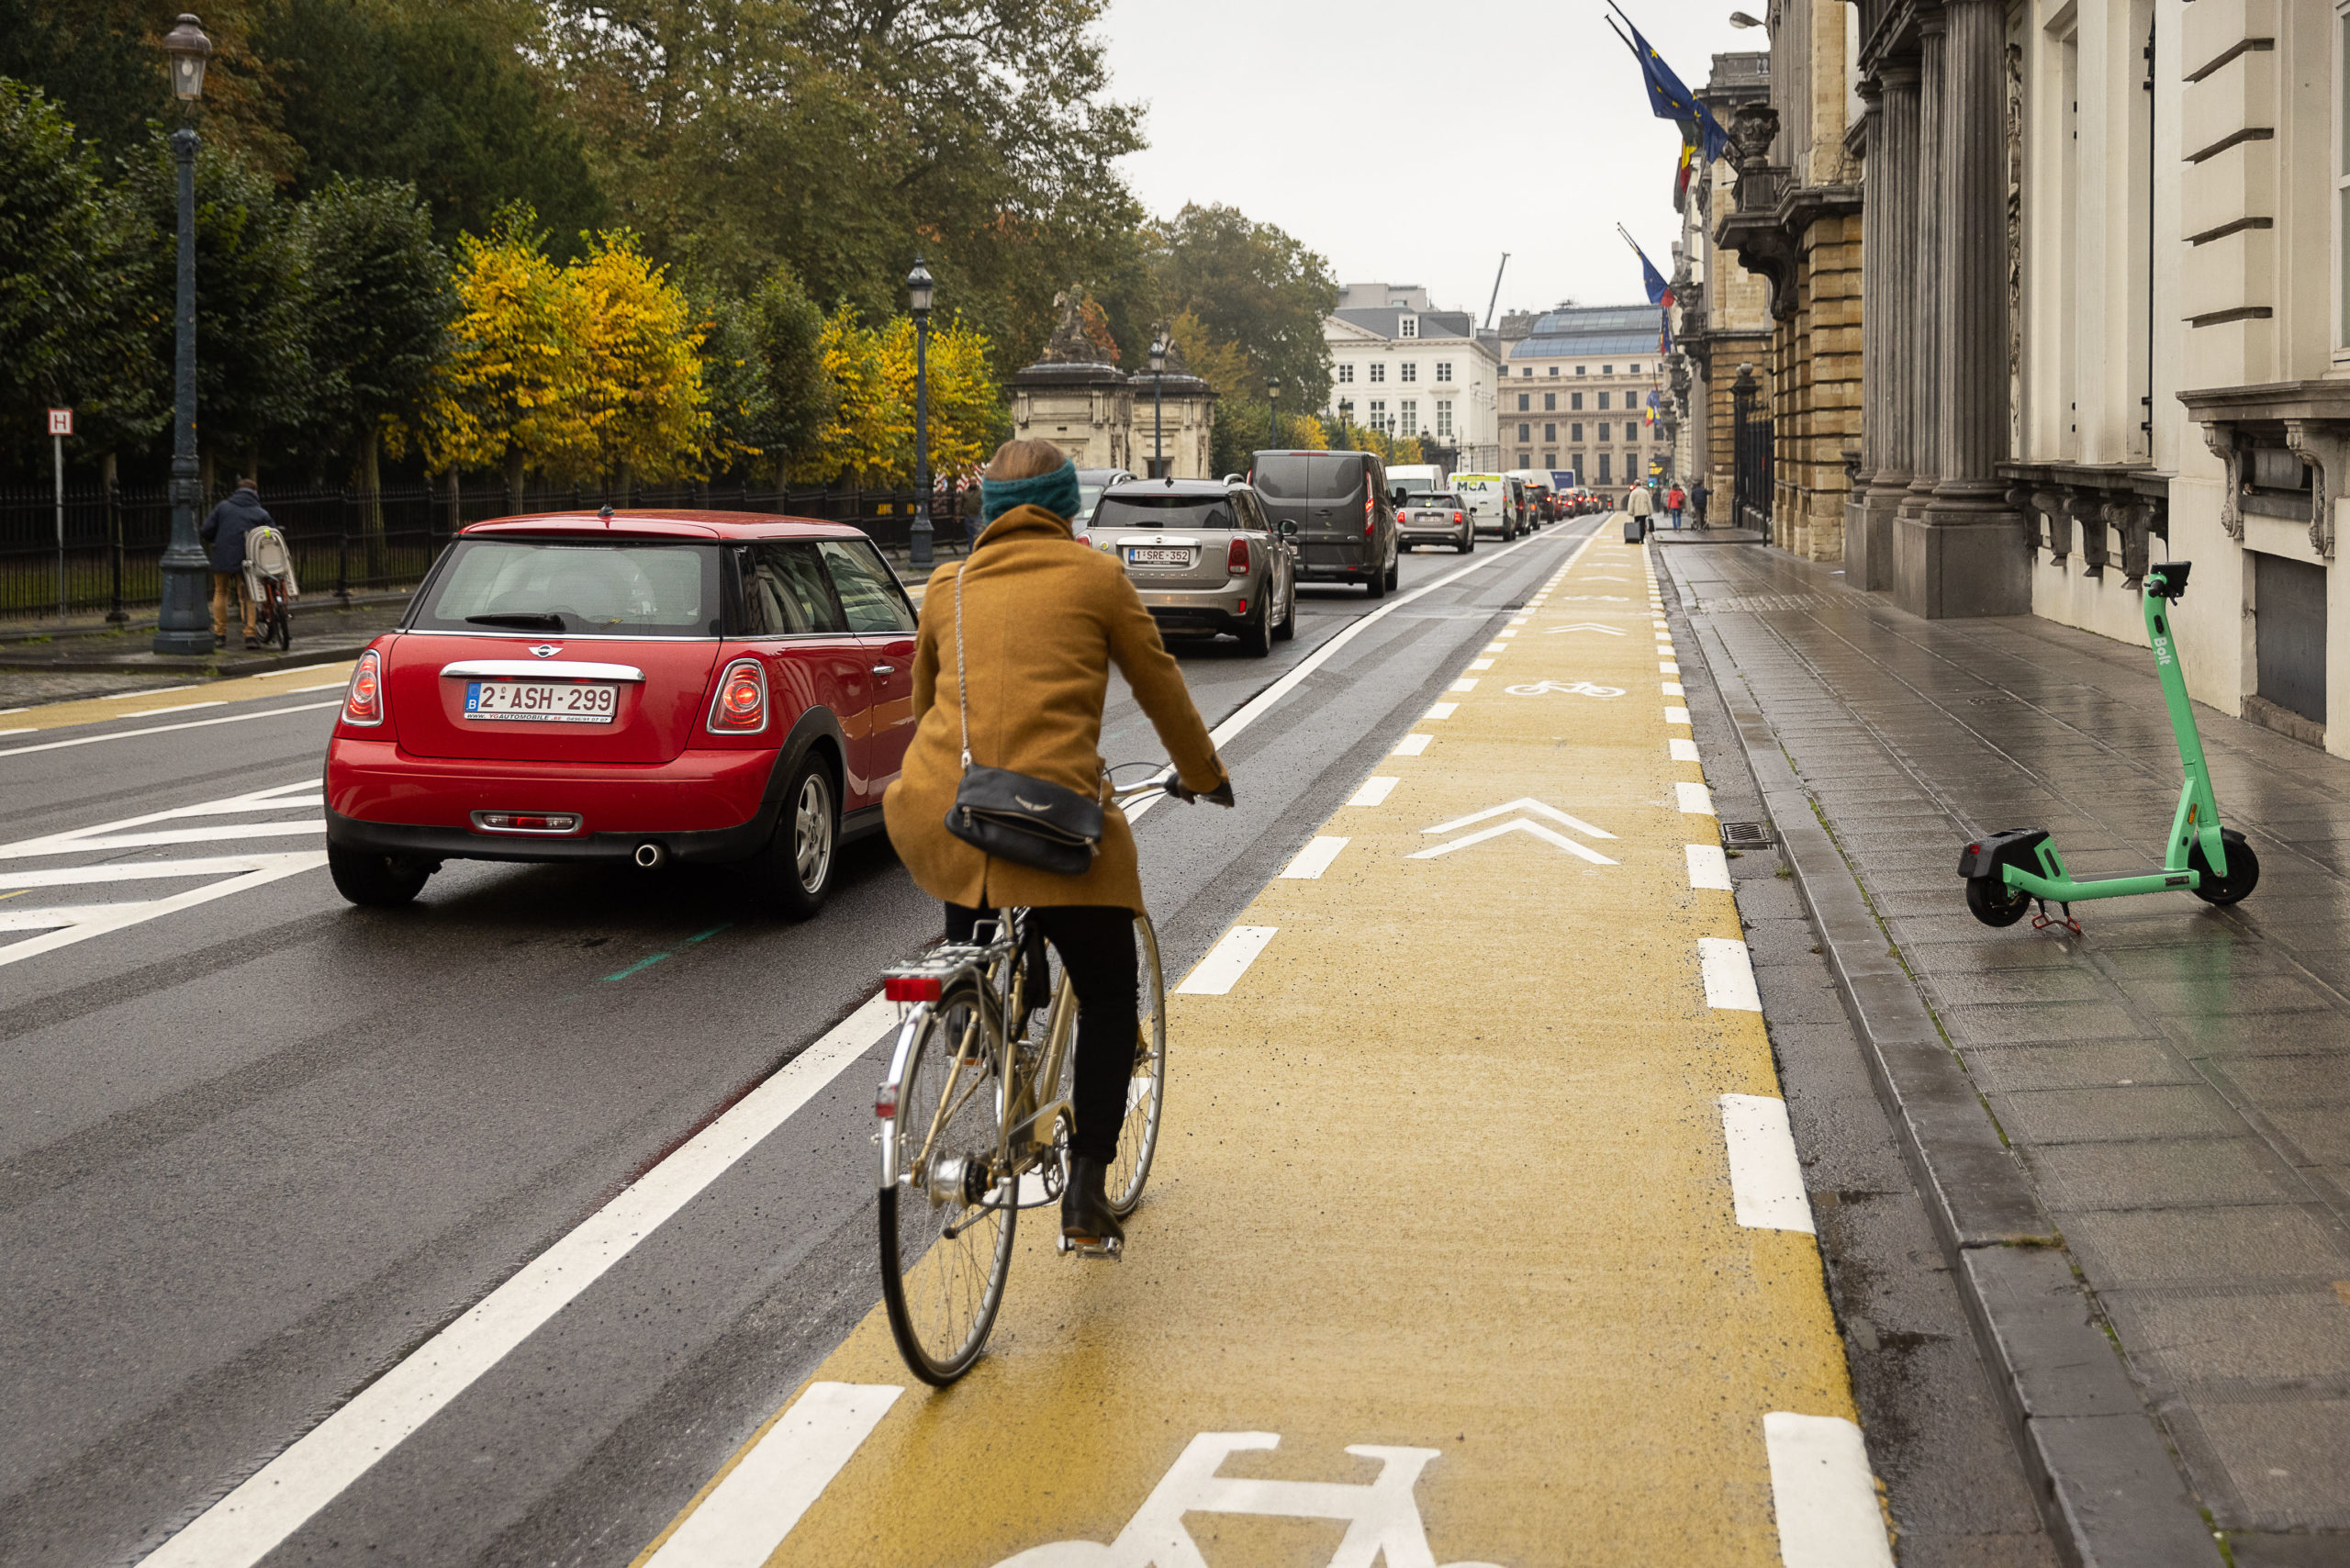 New bikeway in front of Belgian Parliament inaugurated